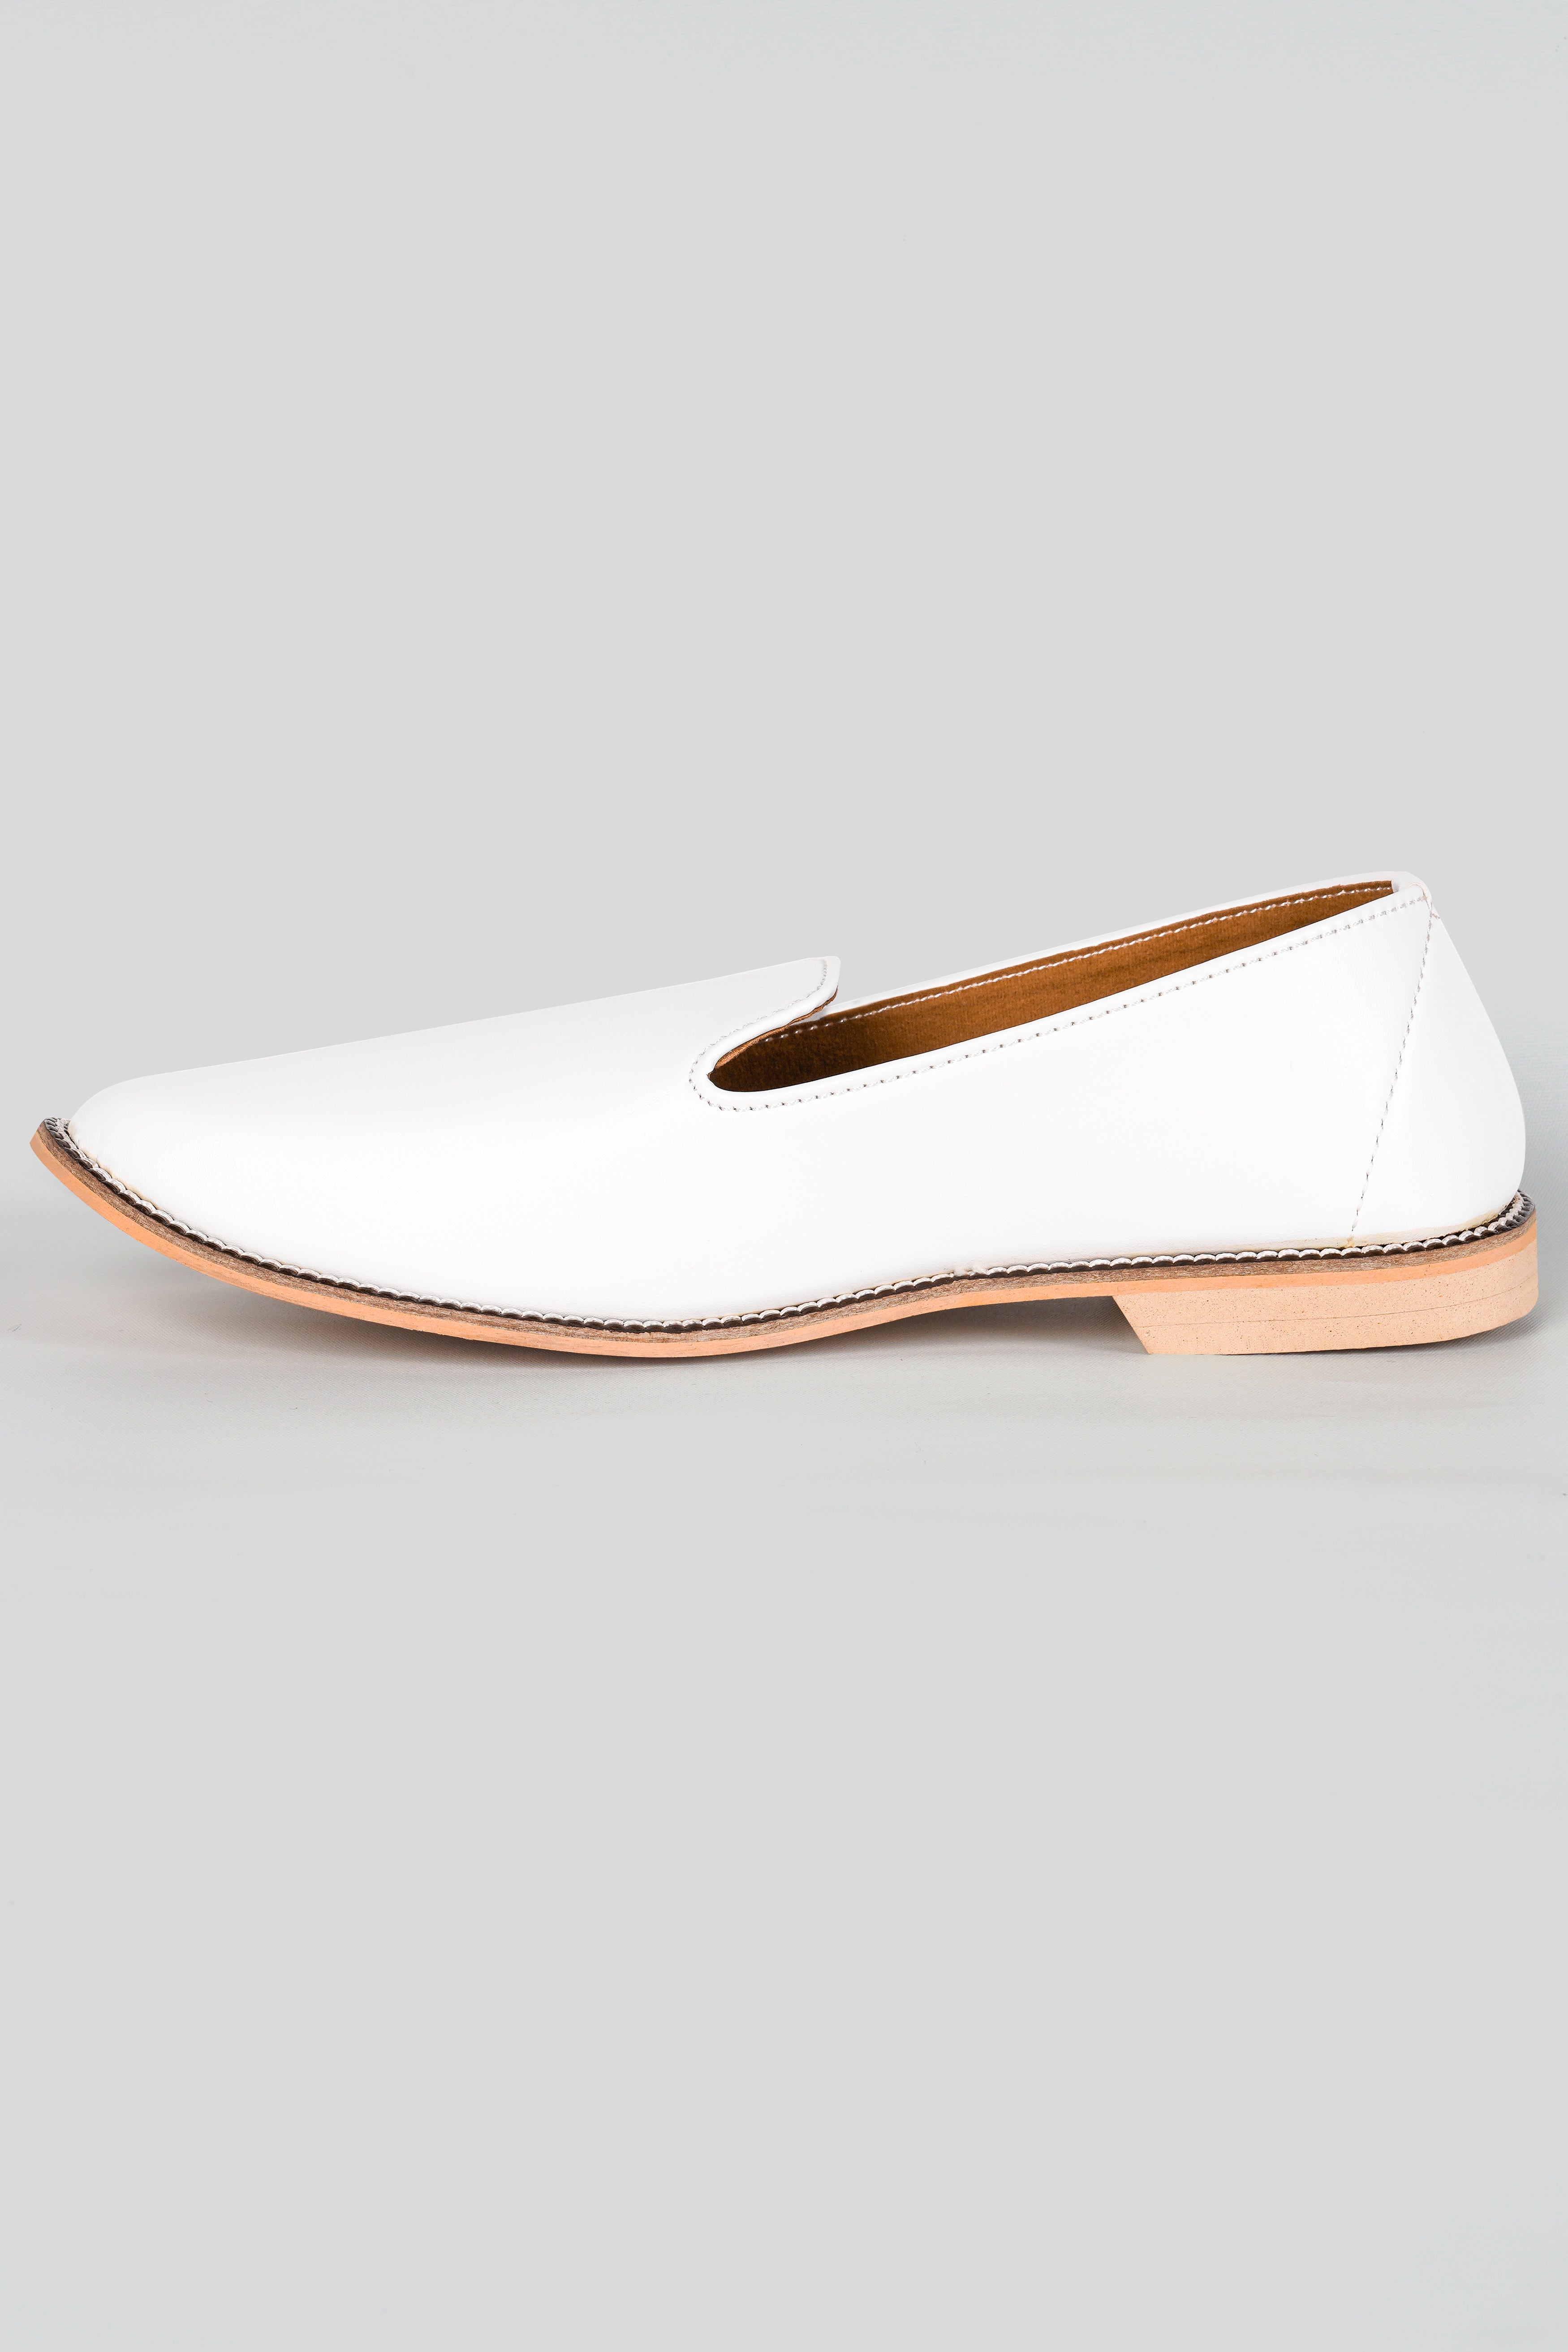 Bright White Vegan Leather Hand Stitched Mojri Slip-On Shoes FT144-6, FT144-7, FT144-8, FT144-9, FT144-10, FT144-11